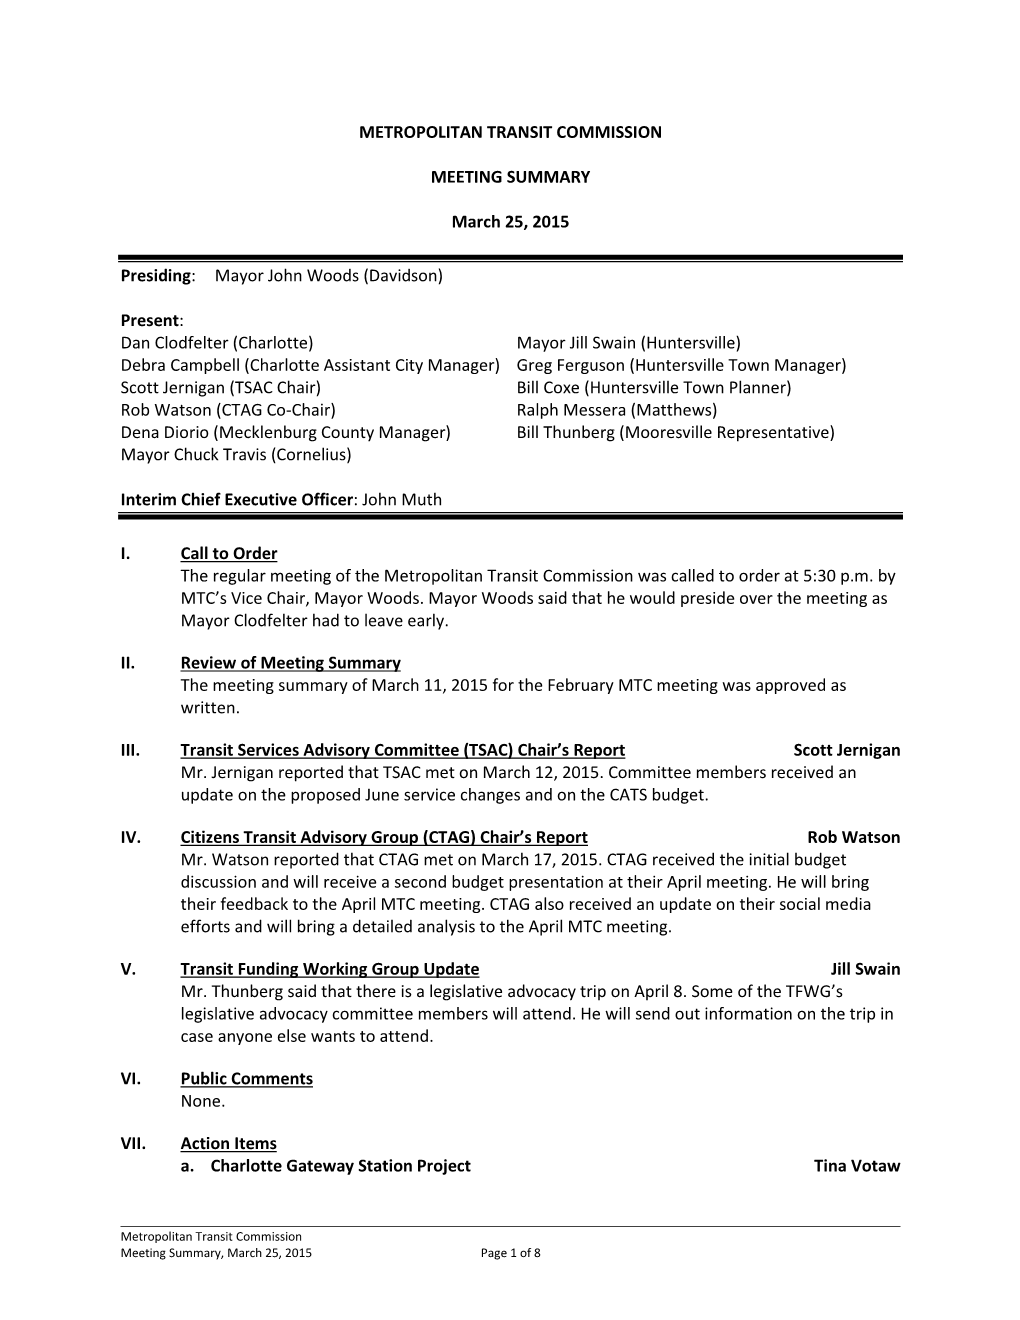 Metropolitan Transit Commission Meeting Summary, March 25, 2015 Page 1 of 8 Ms